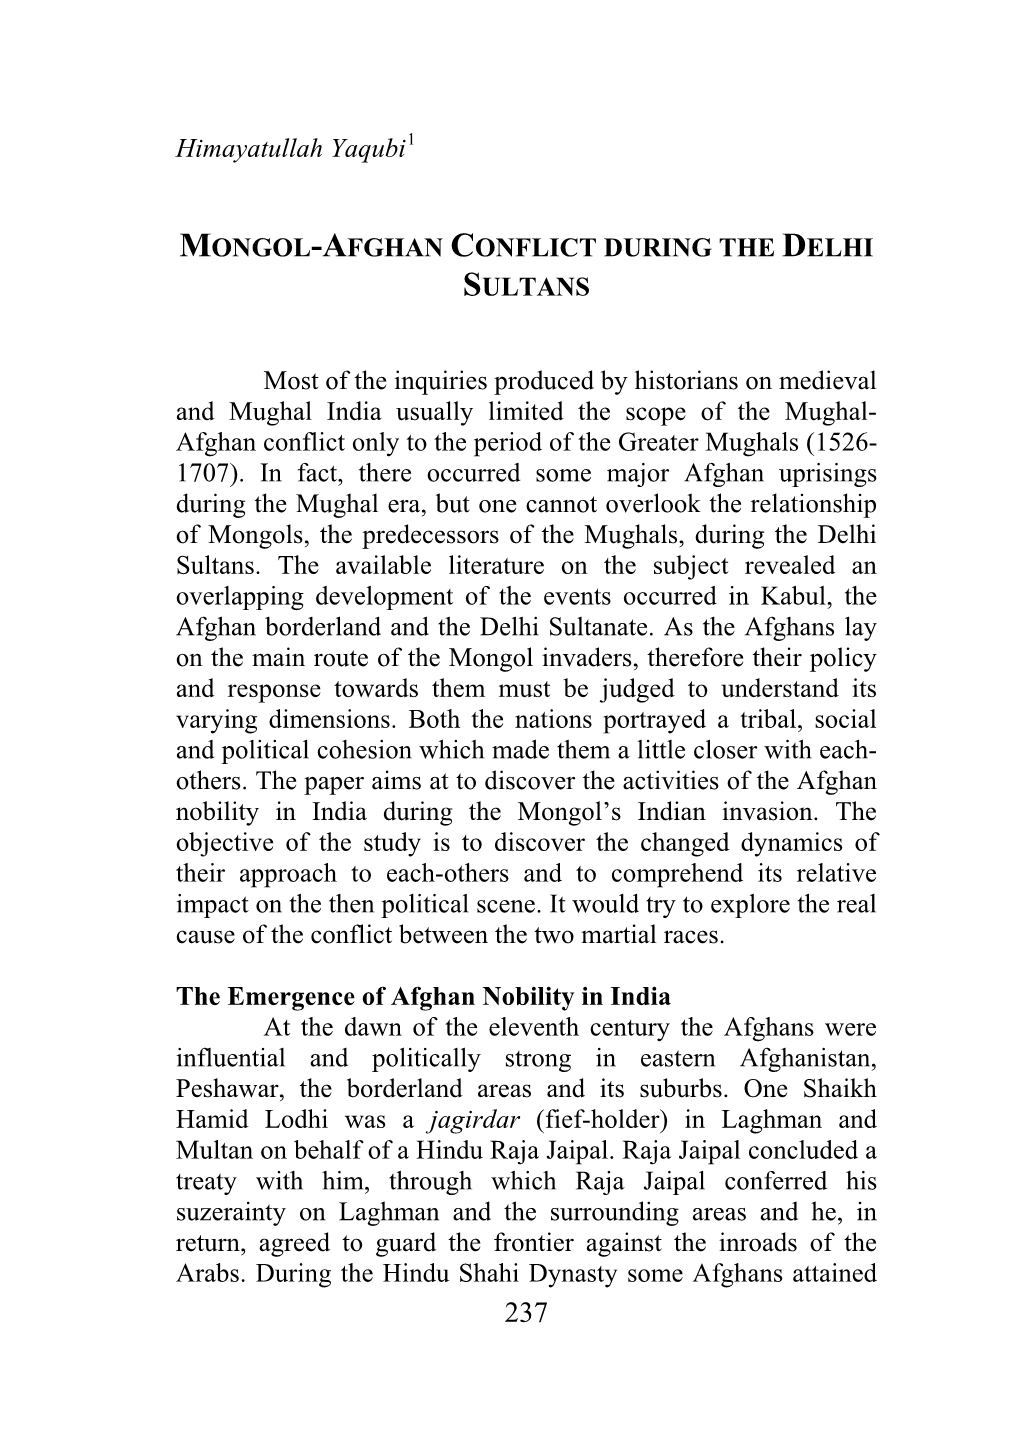 Mongol-Afghan Conflict During the Delhi Sultans